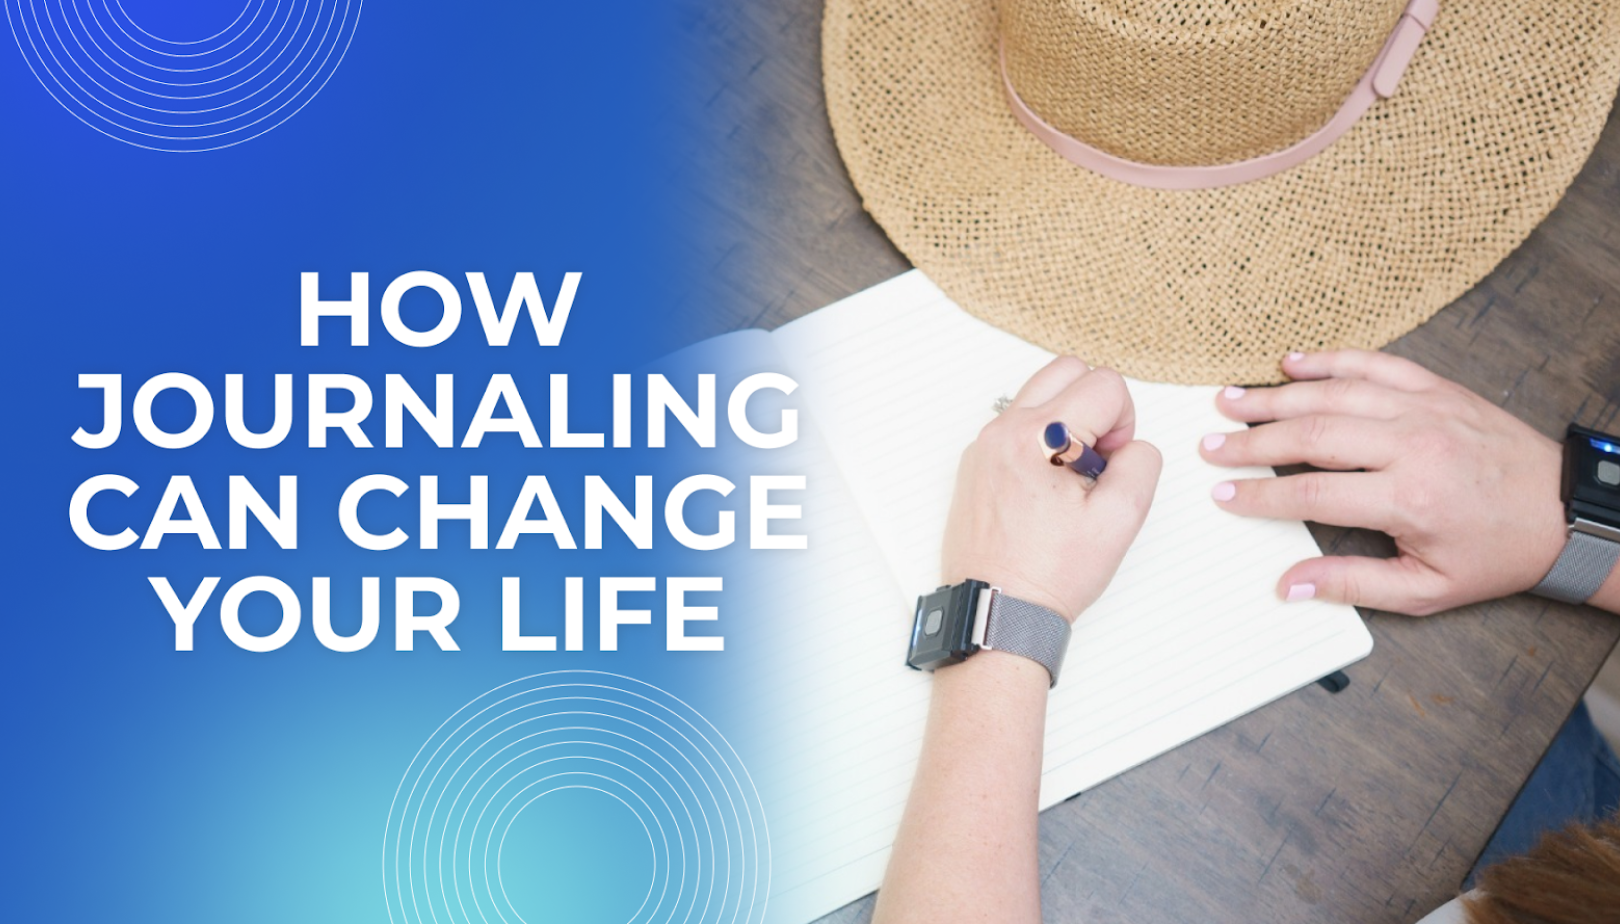 The Power Of Expression: How Journaling Can Change Your Life